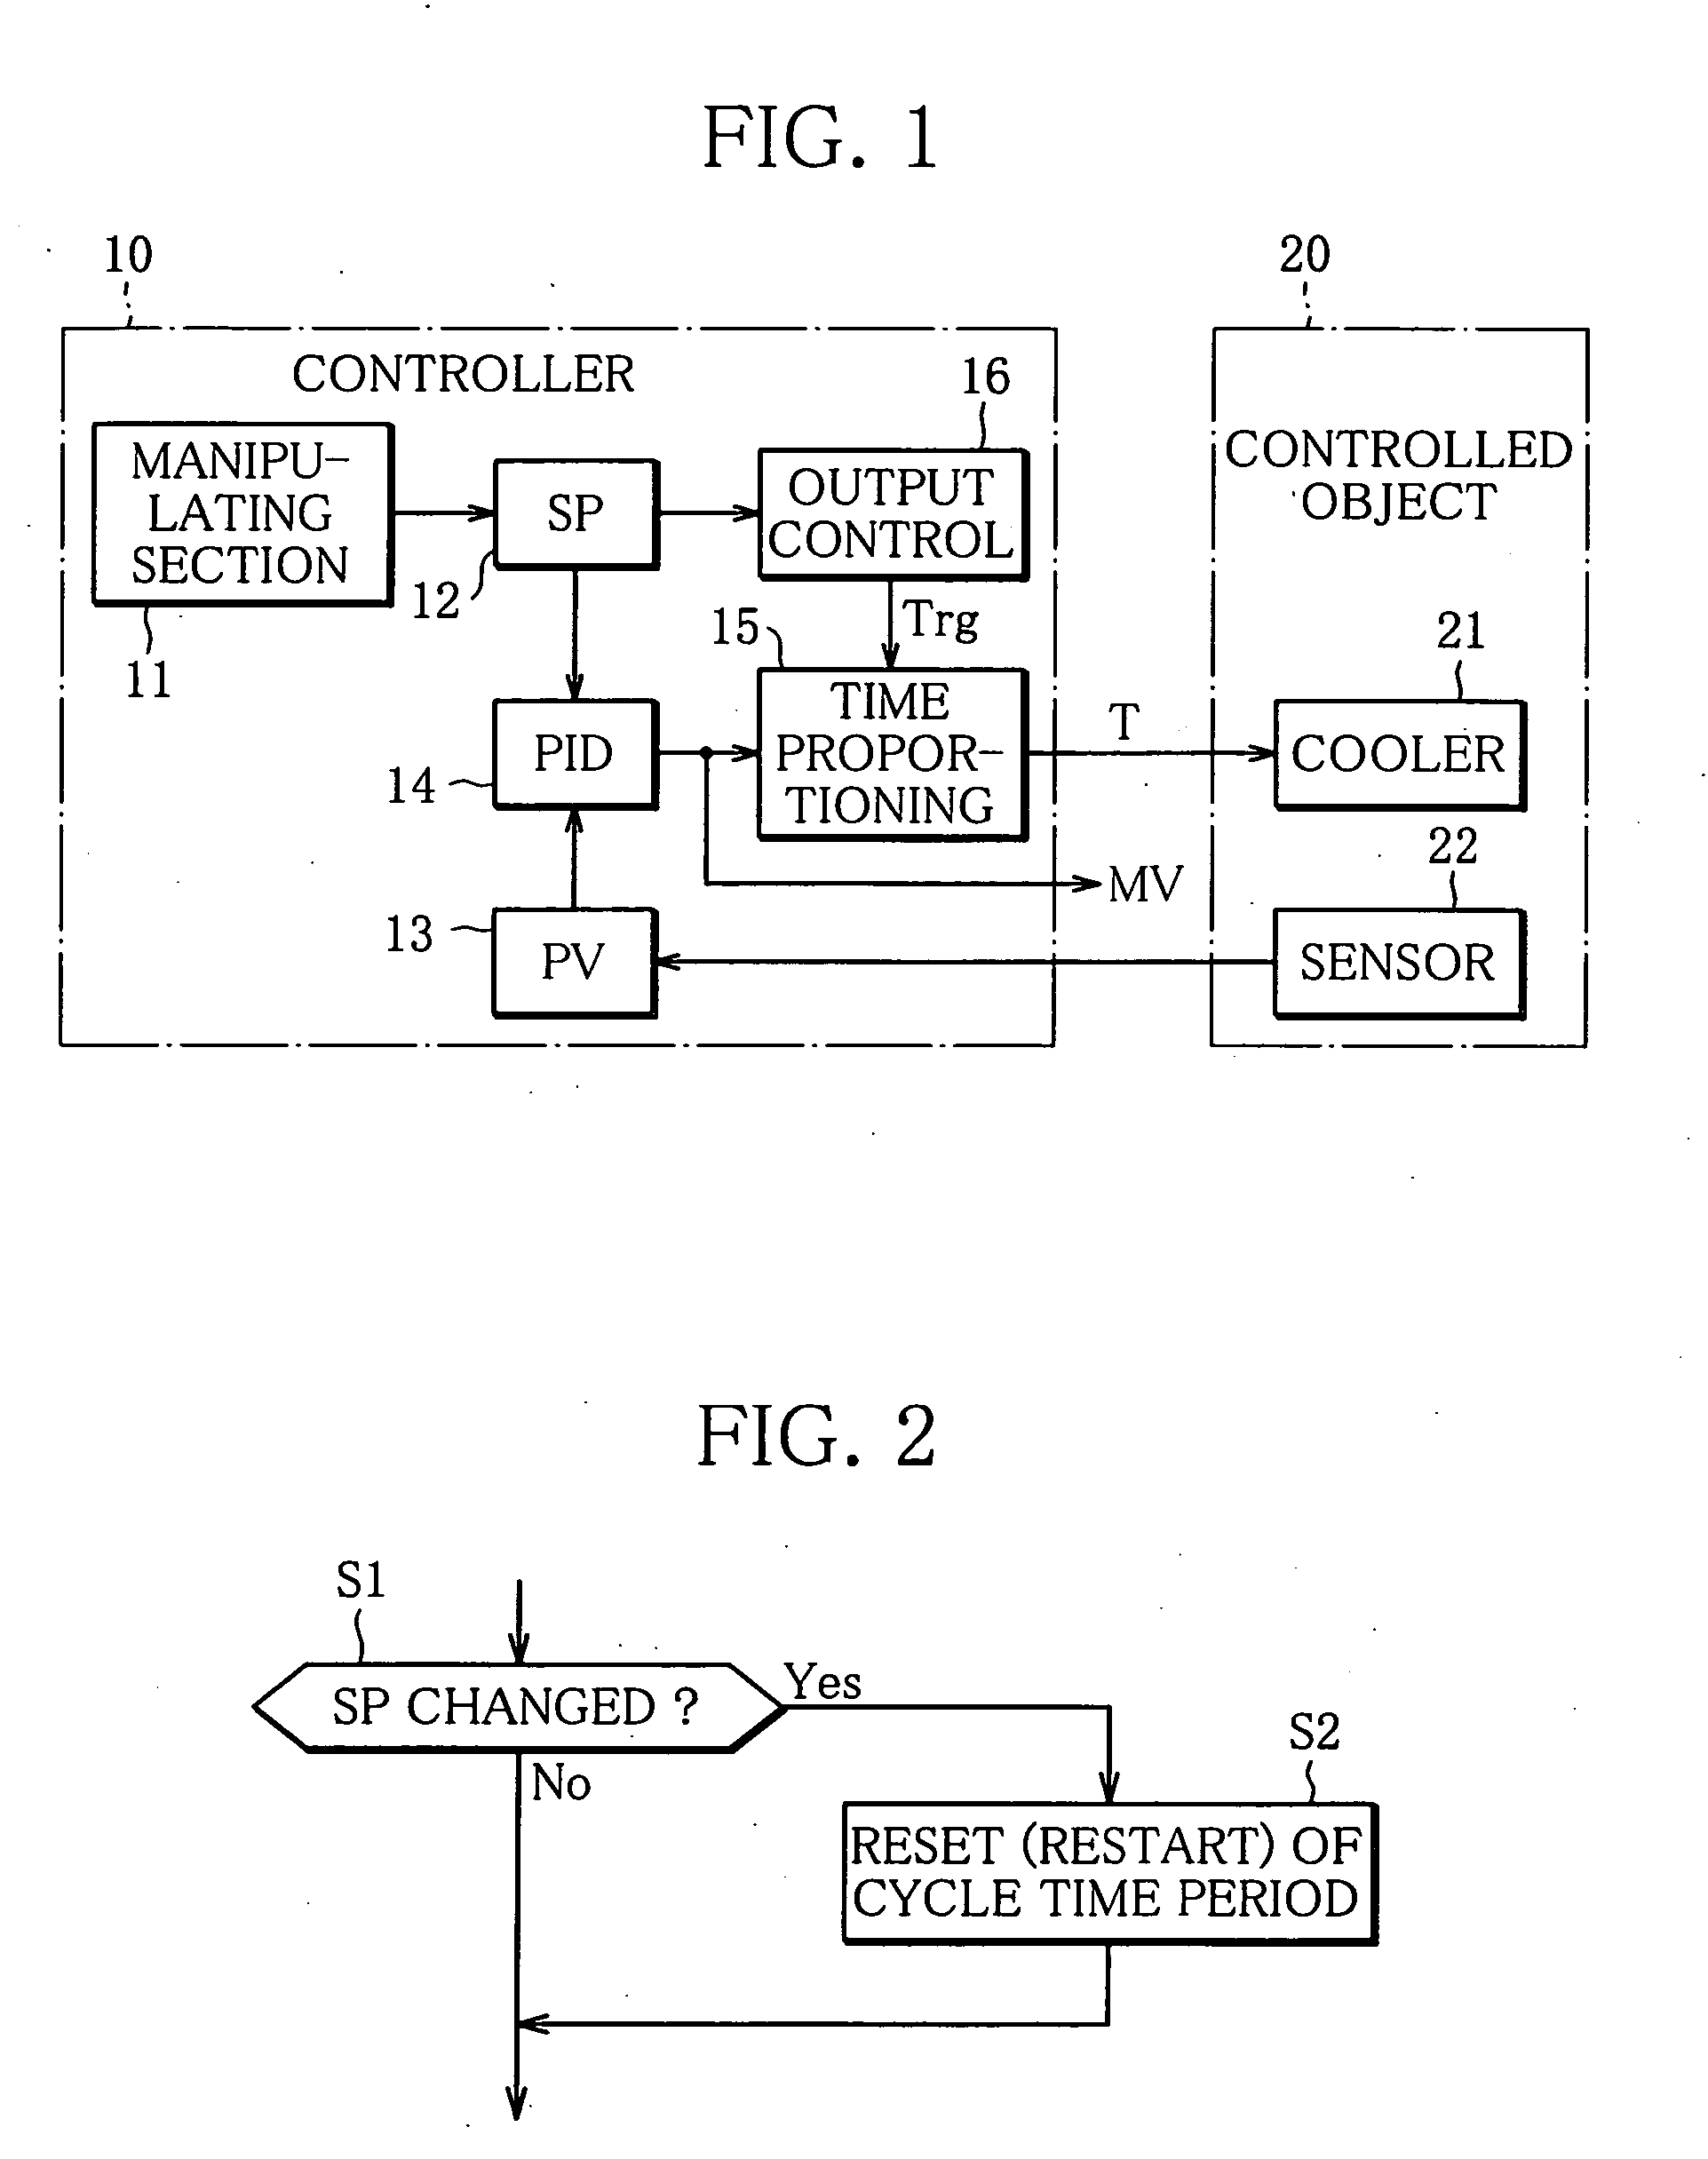 Control apparatus using time proportioning control